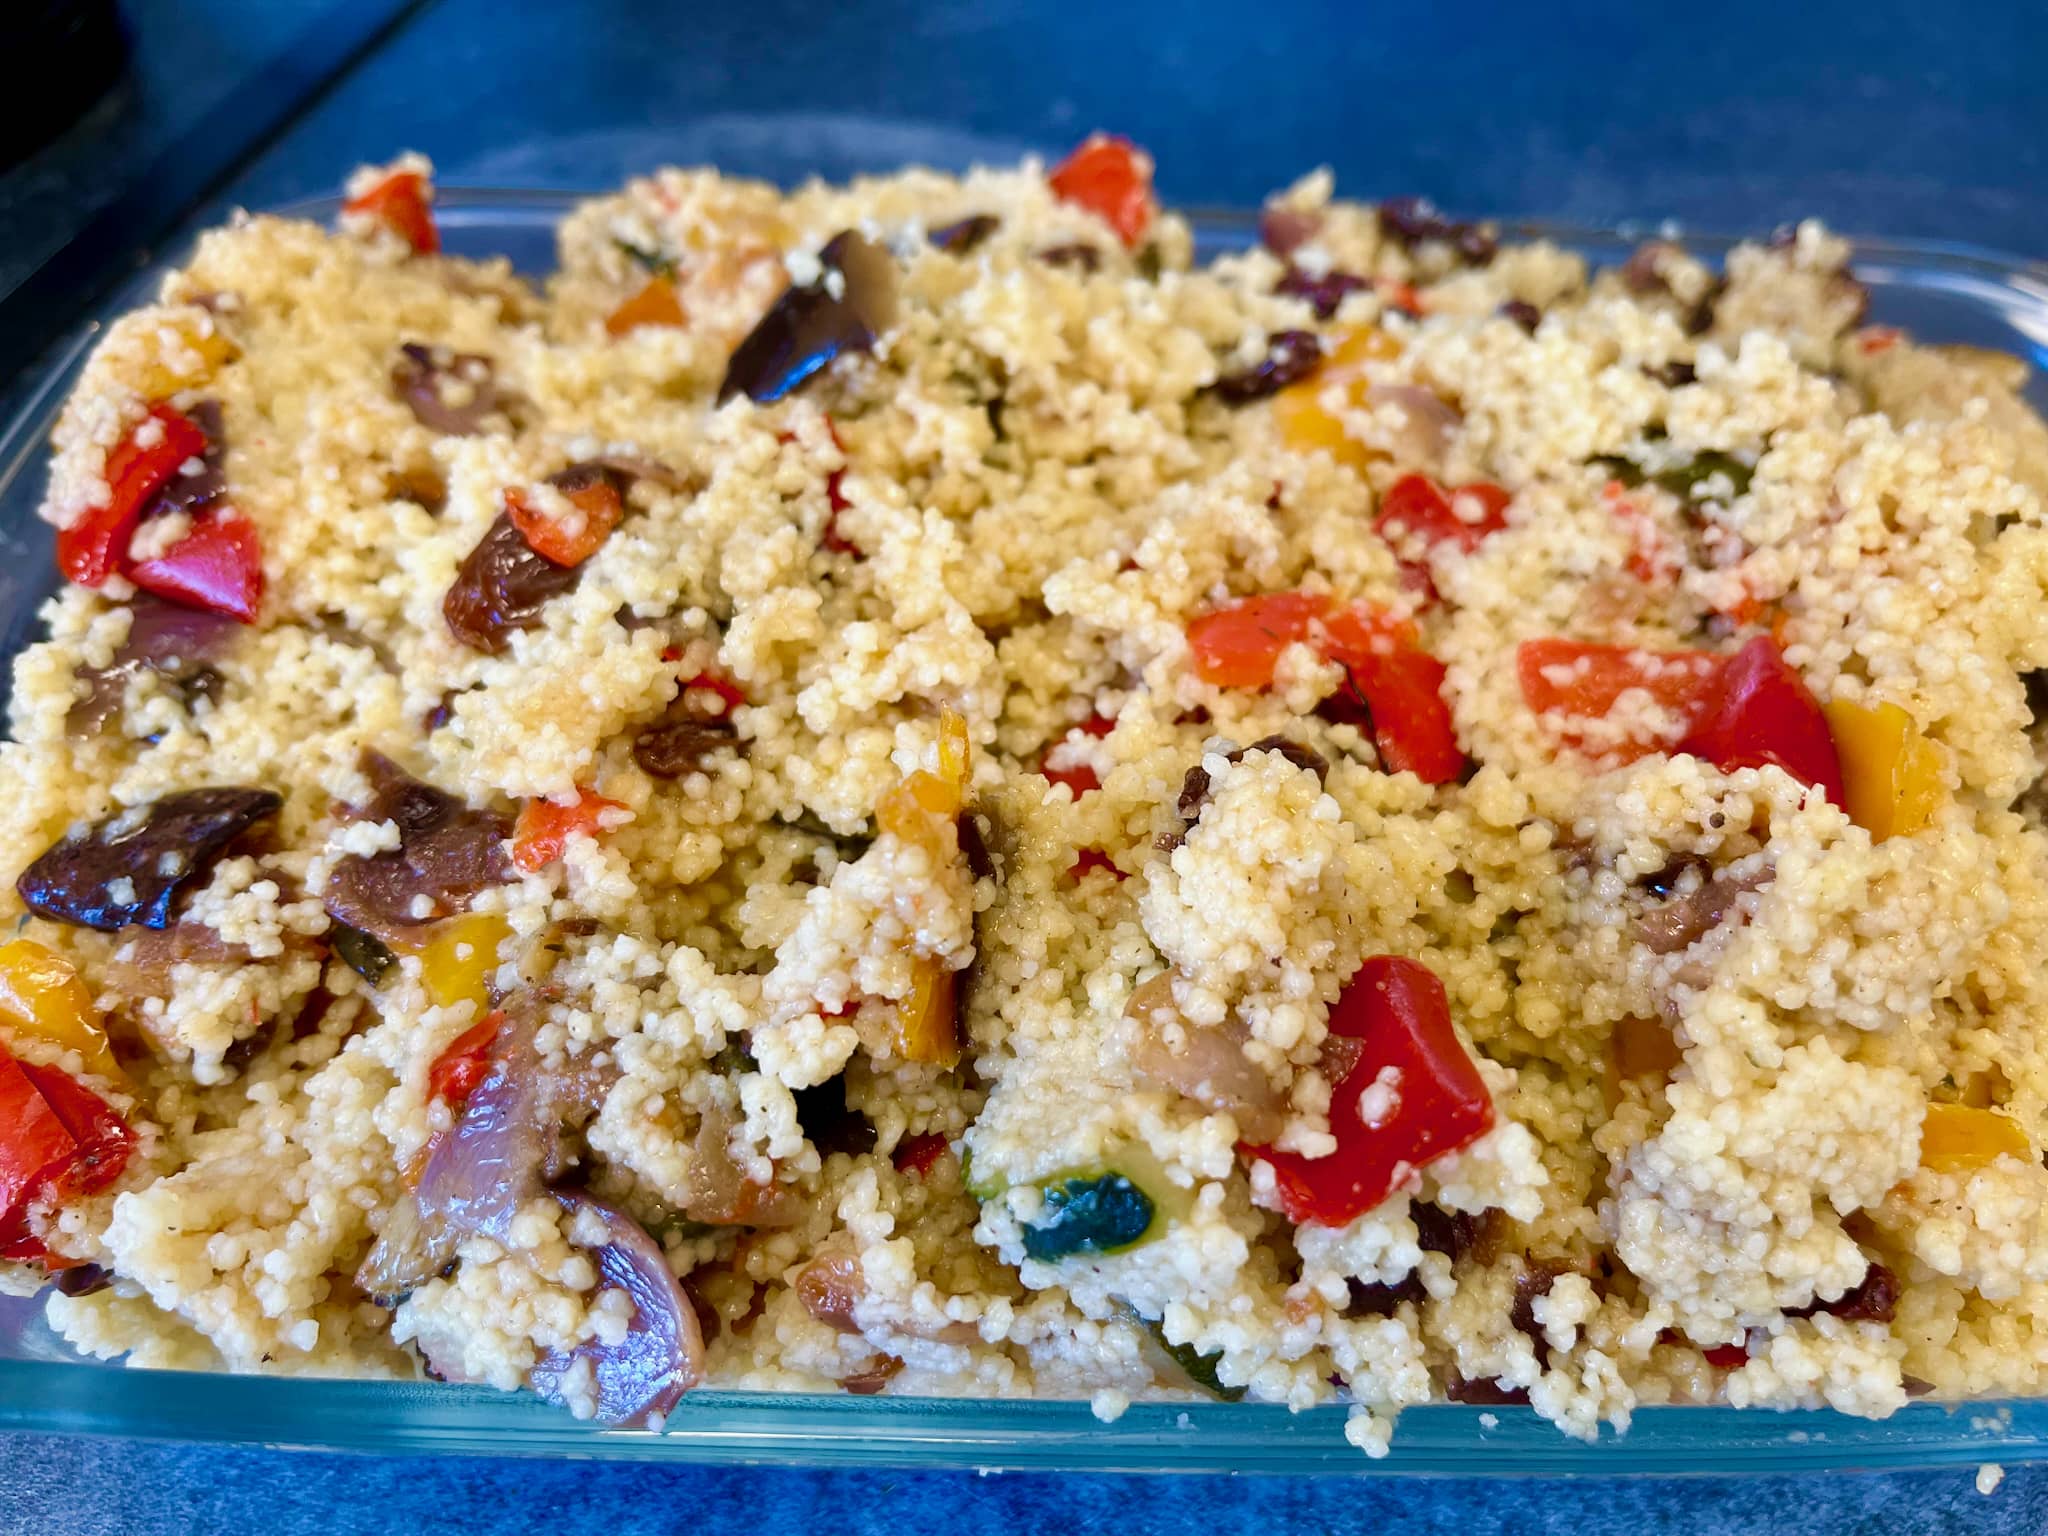 Roasted Mediterranean vegetables combined with couscous